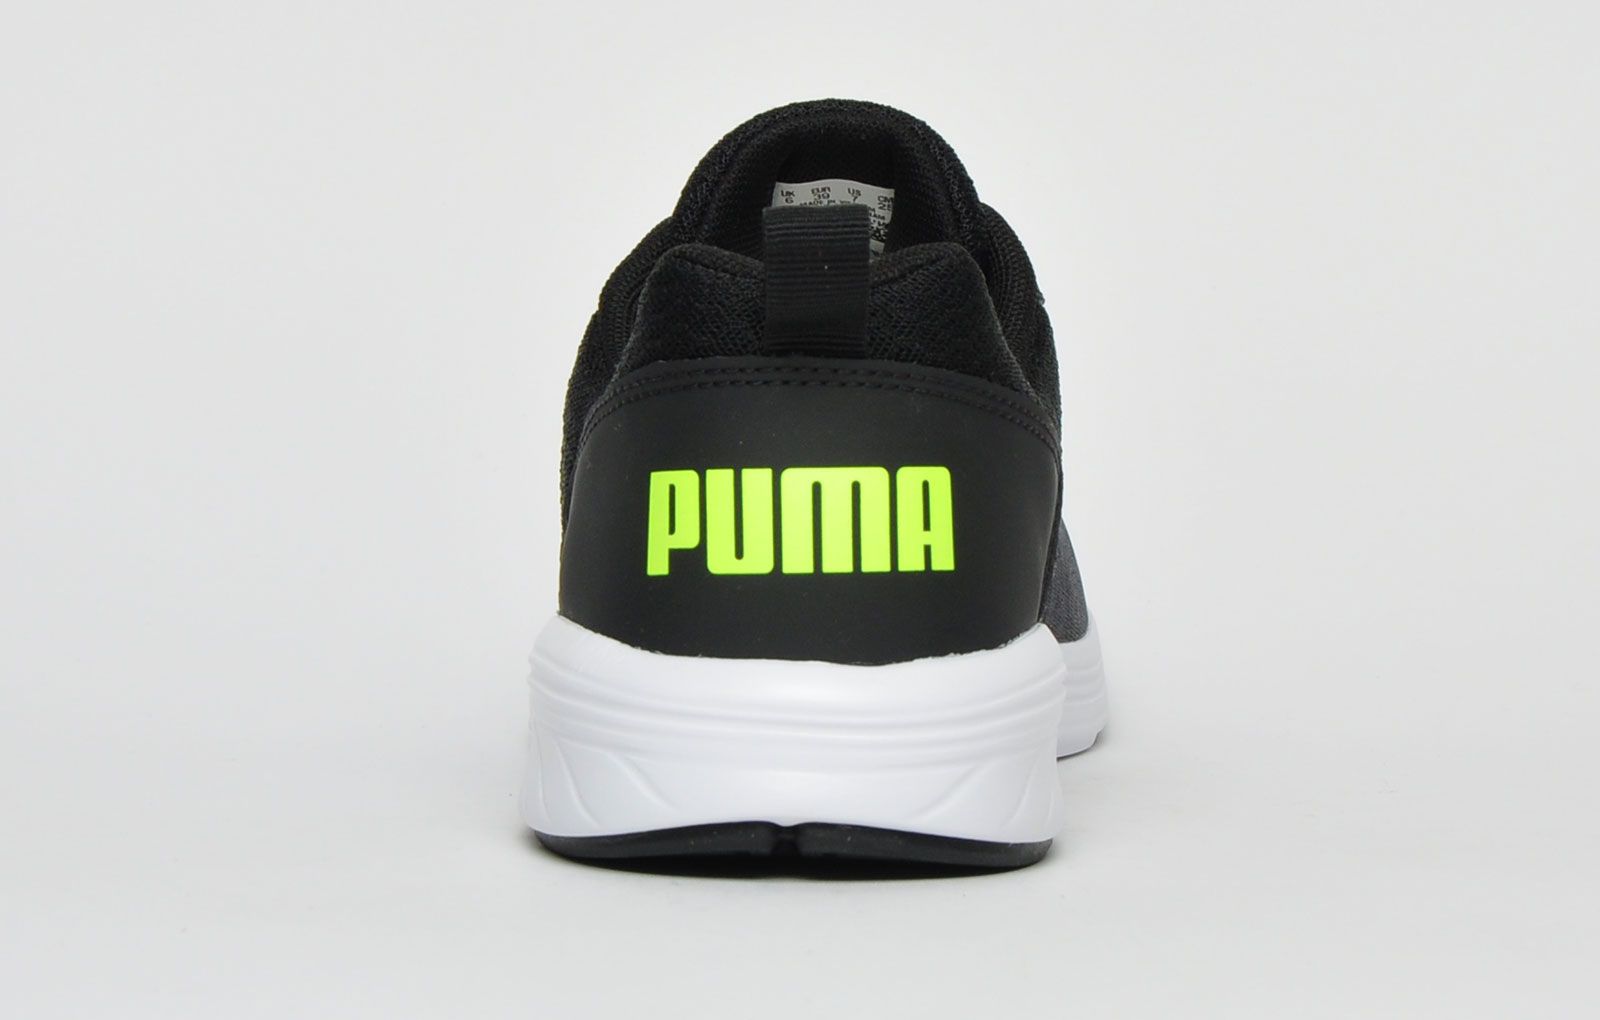 <p>With a sleek, contemporary upper, the NRGY Comet Fit+ adds style to the traditional lightweight runner so it’s great for running, the gym and general everyday wear.</p> <p>Featuring a flexible lightweight upper with Fit+ technology which adapts to the foot shape for a snug fit with a supportive midsole for high energy return and comfort</p> <p>The soft comfort insoles provide a walk on air feeling adapting quickly to the foot delivering supreme comfort with added protection, finished with non-slip rubber on the heel and toes for additional grip.</p> <p>- Textile / synthetic upper</p> <p>- Heel loop for easy on/off wear</p> <p>- Eva Foam Midsole</p> <p>- Soft foam cushioned insoles</p> <p>- Durable rubber outsole</p> <p>- Added toe protection</p> <p>- Puma branding throughout</p>